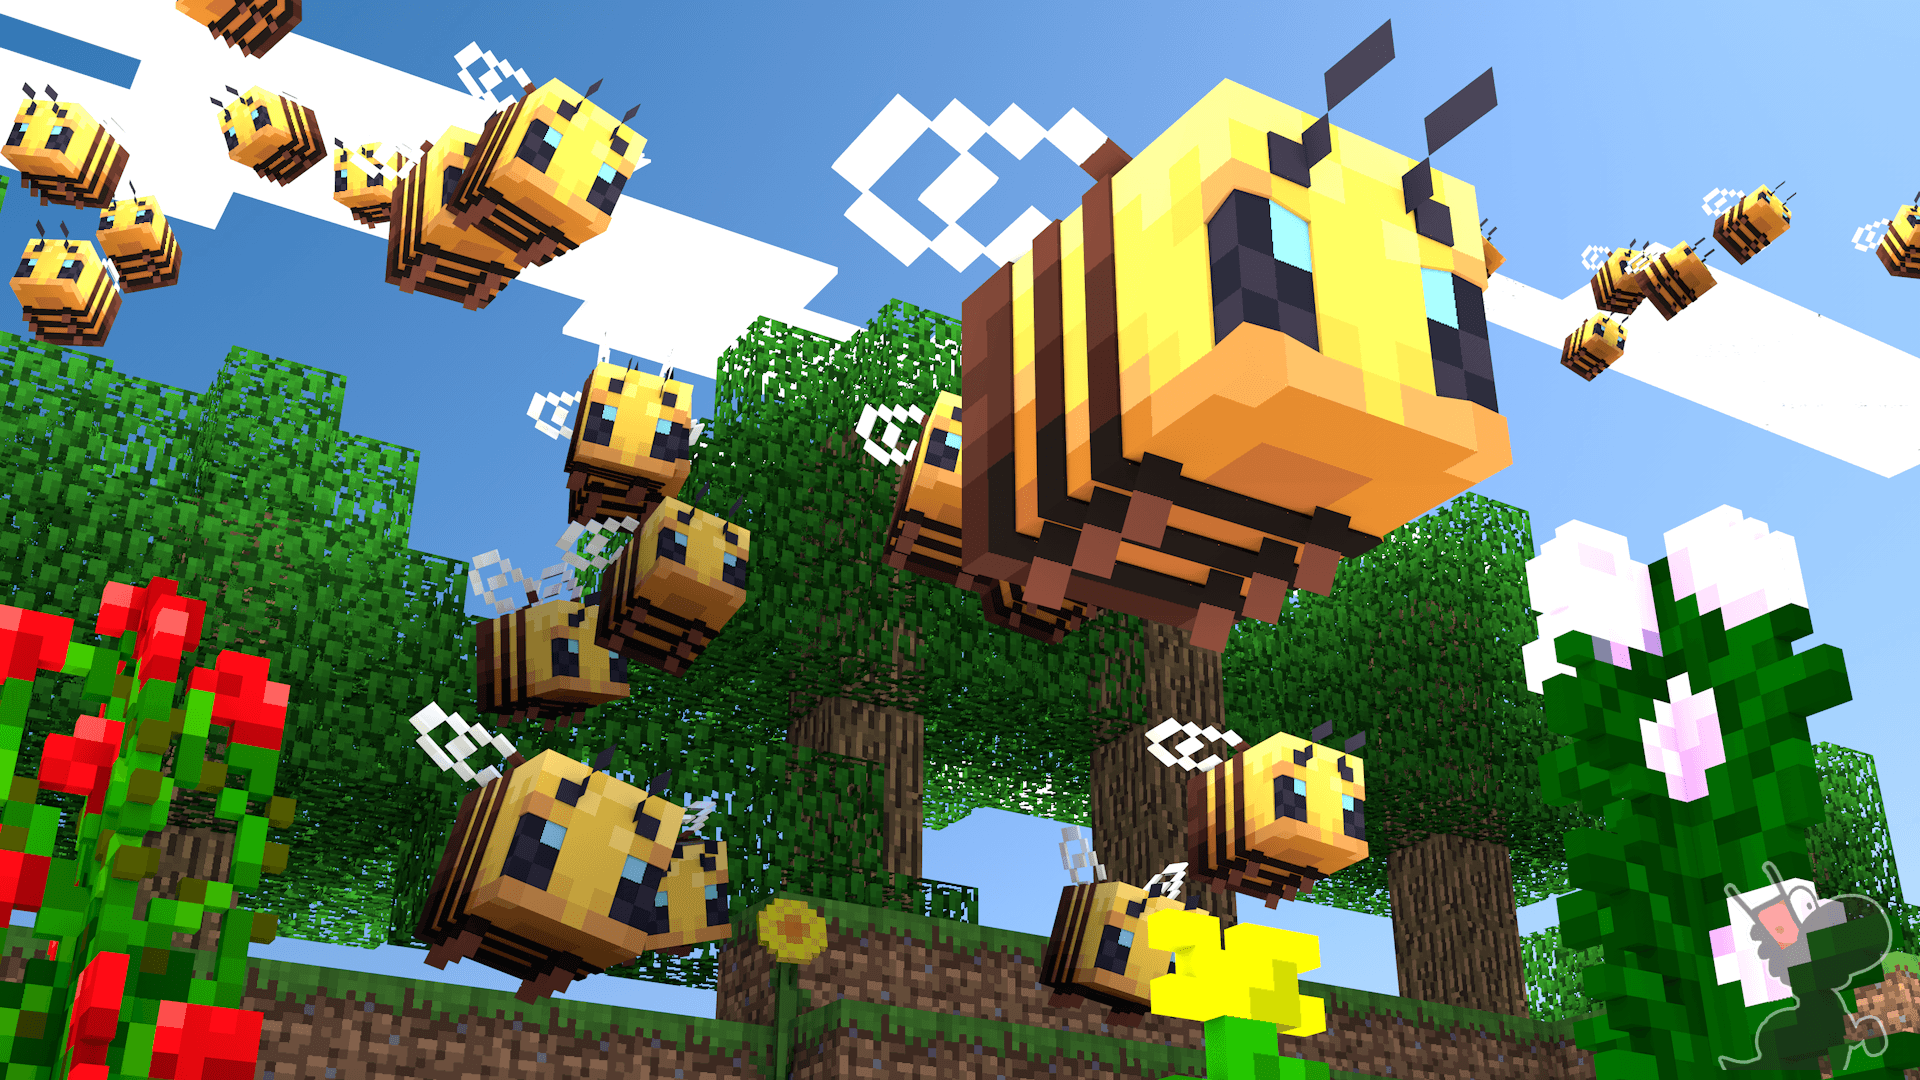 Since bees are now in Minecraft, I made a little render